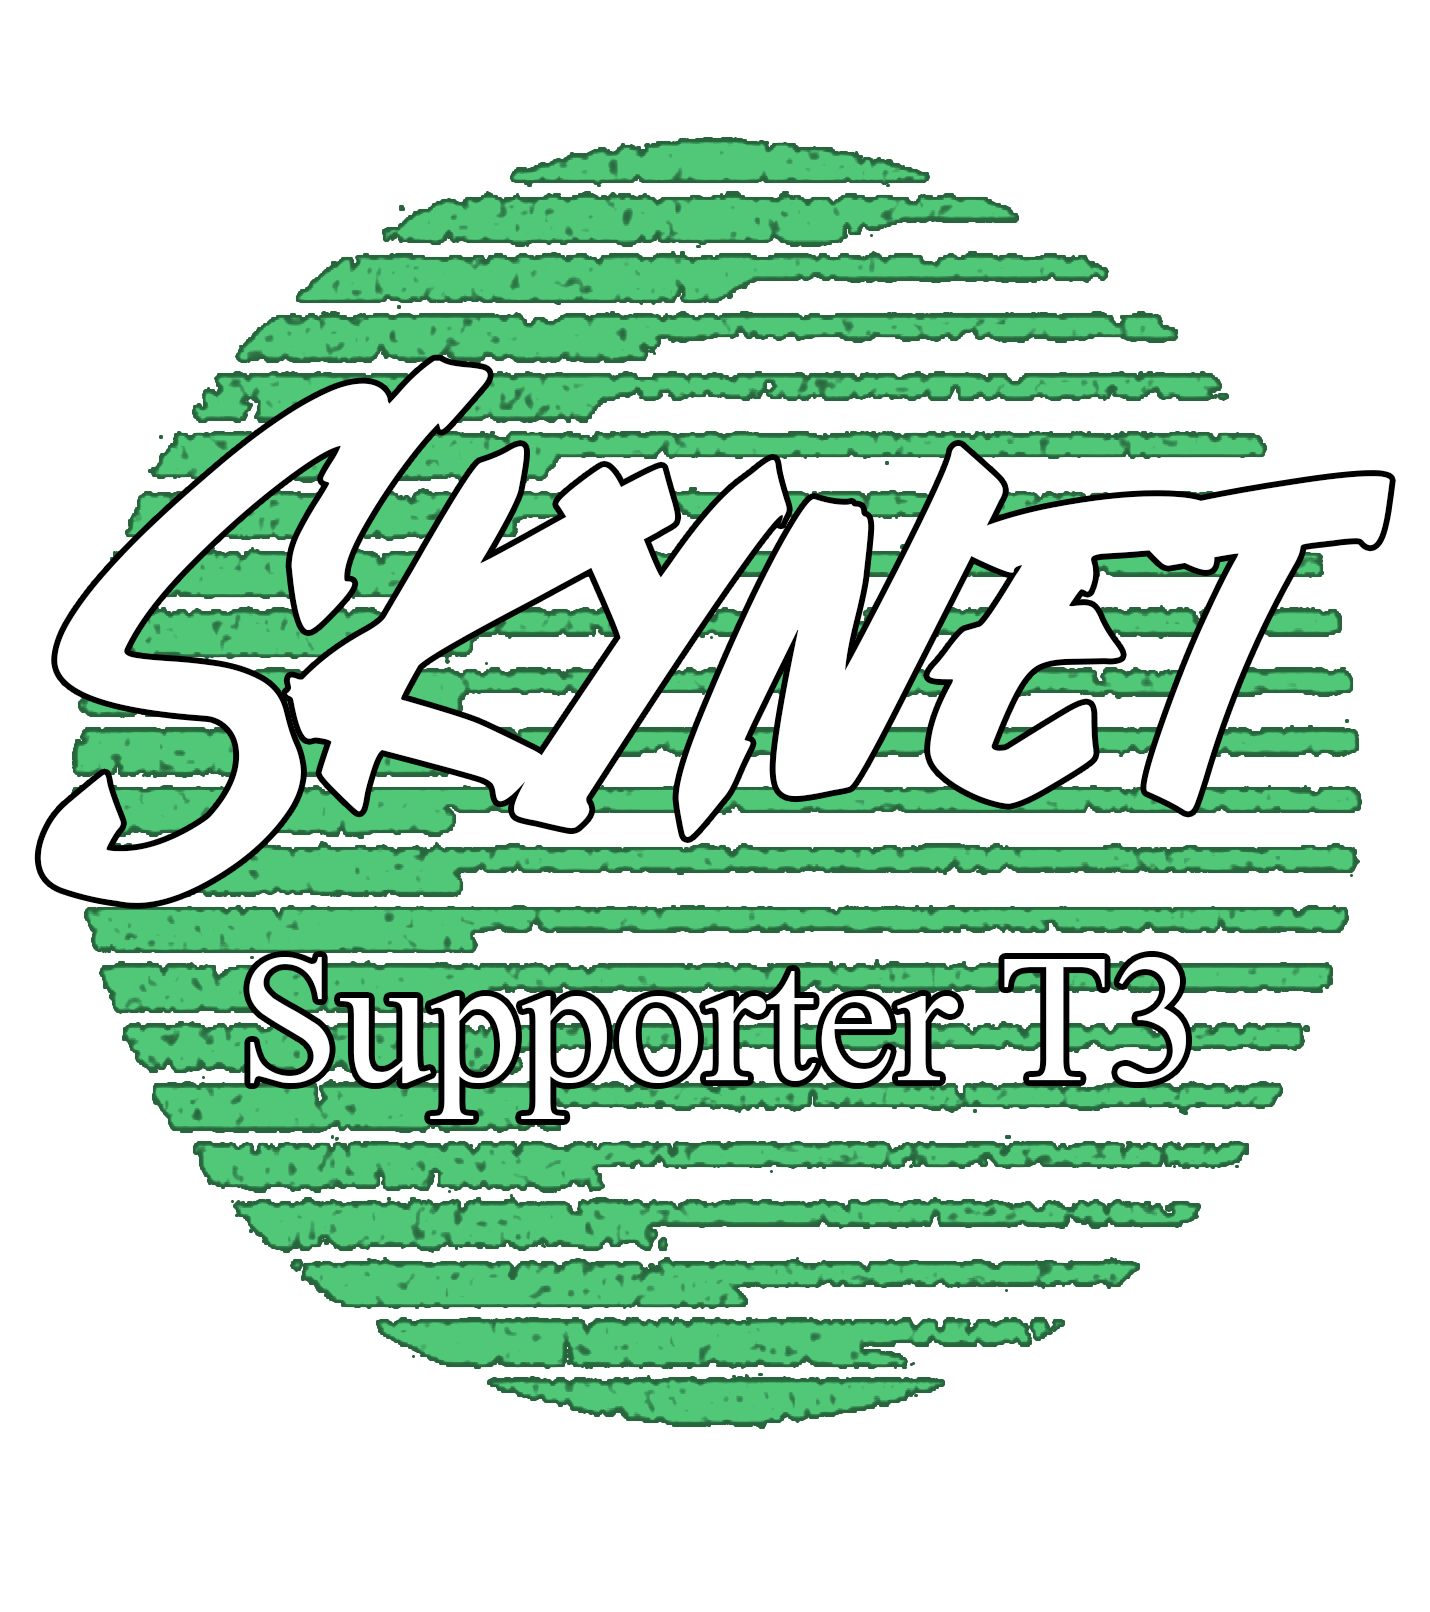 Supporter - T3